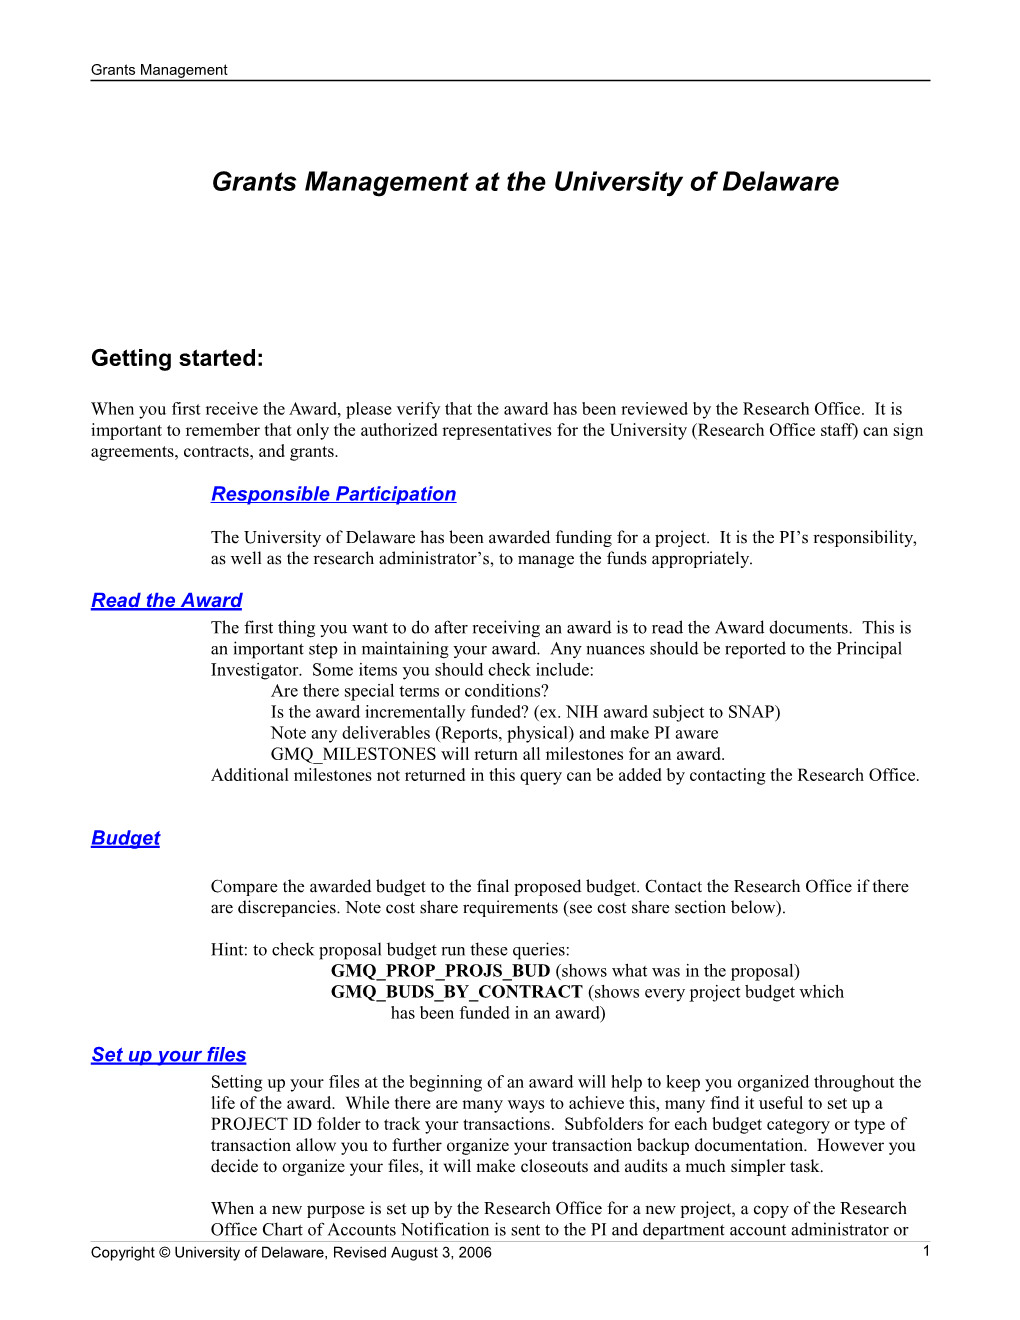 Grants Management at the University of Delaware